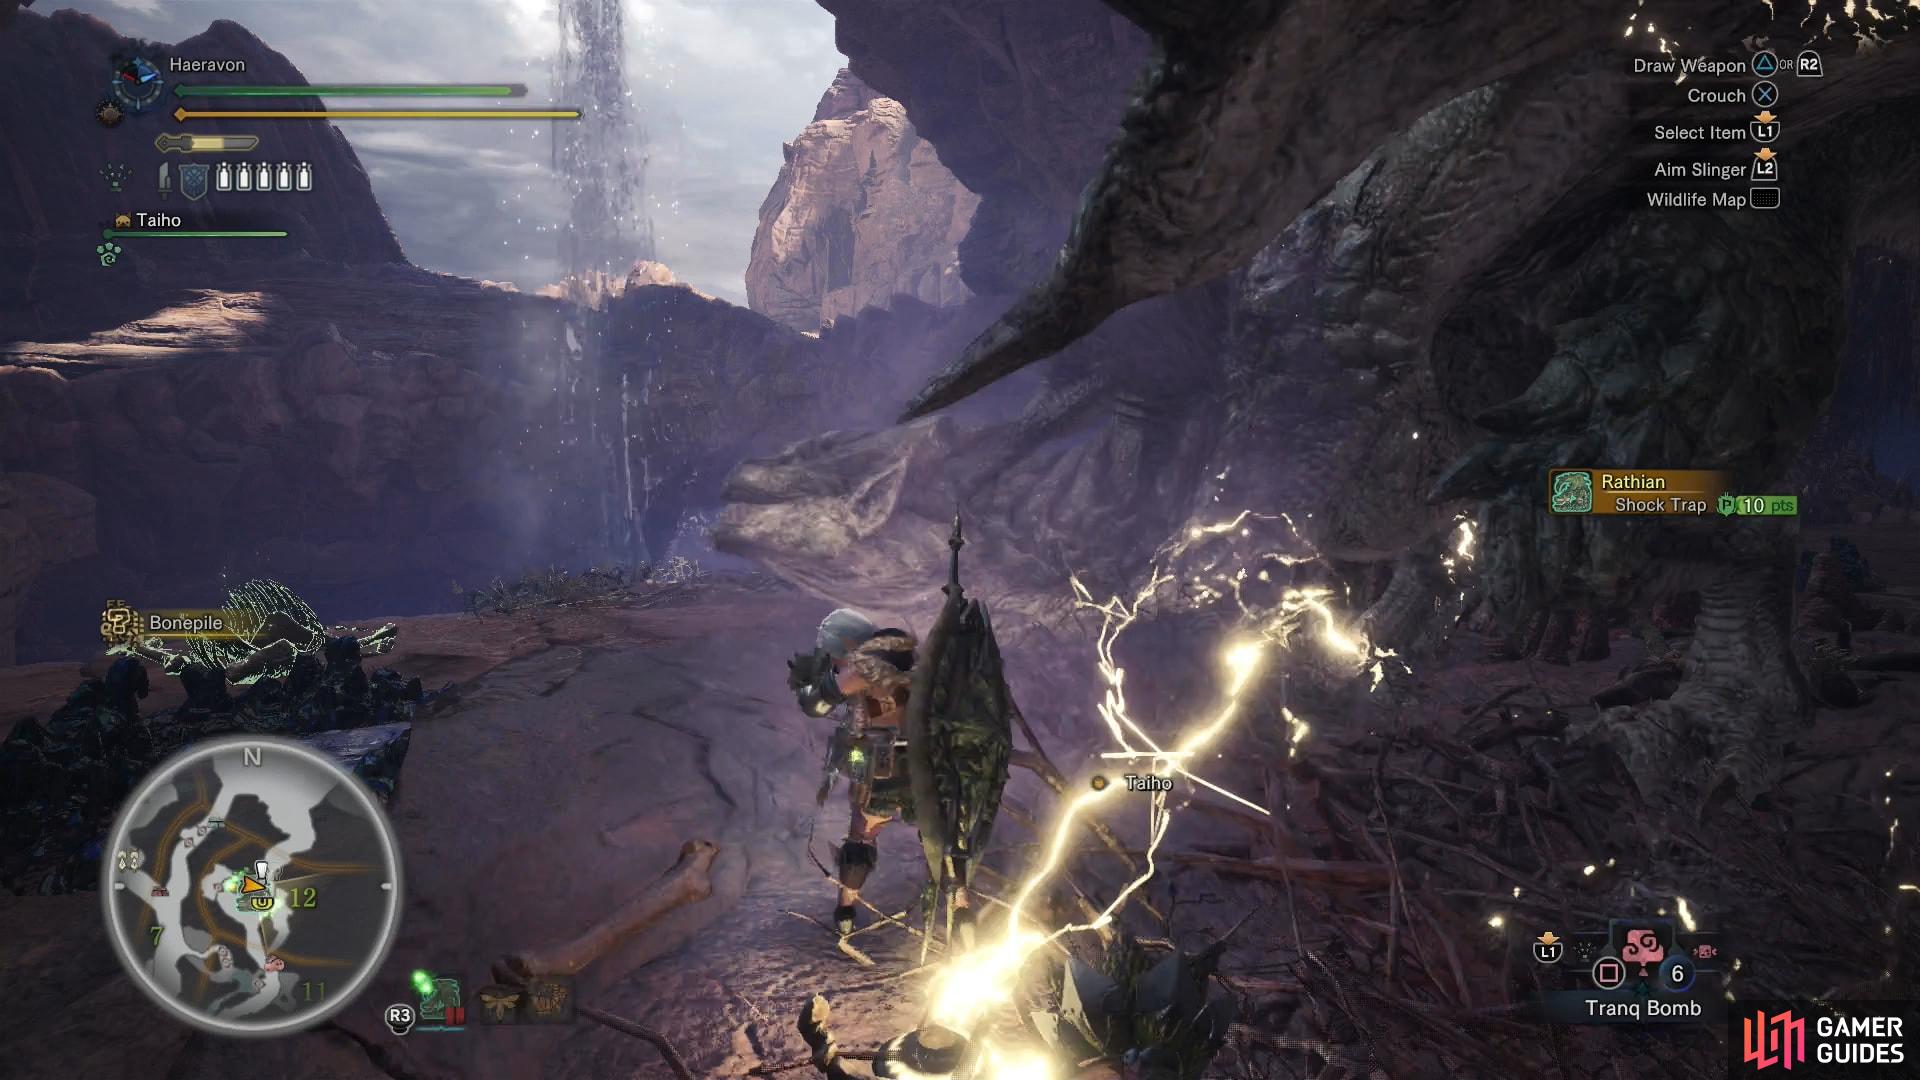 After its sufficiently wounded, the Rathian will flee to its nest, where you can capture it if you wish to end the fight more quickly